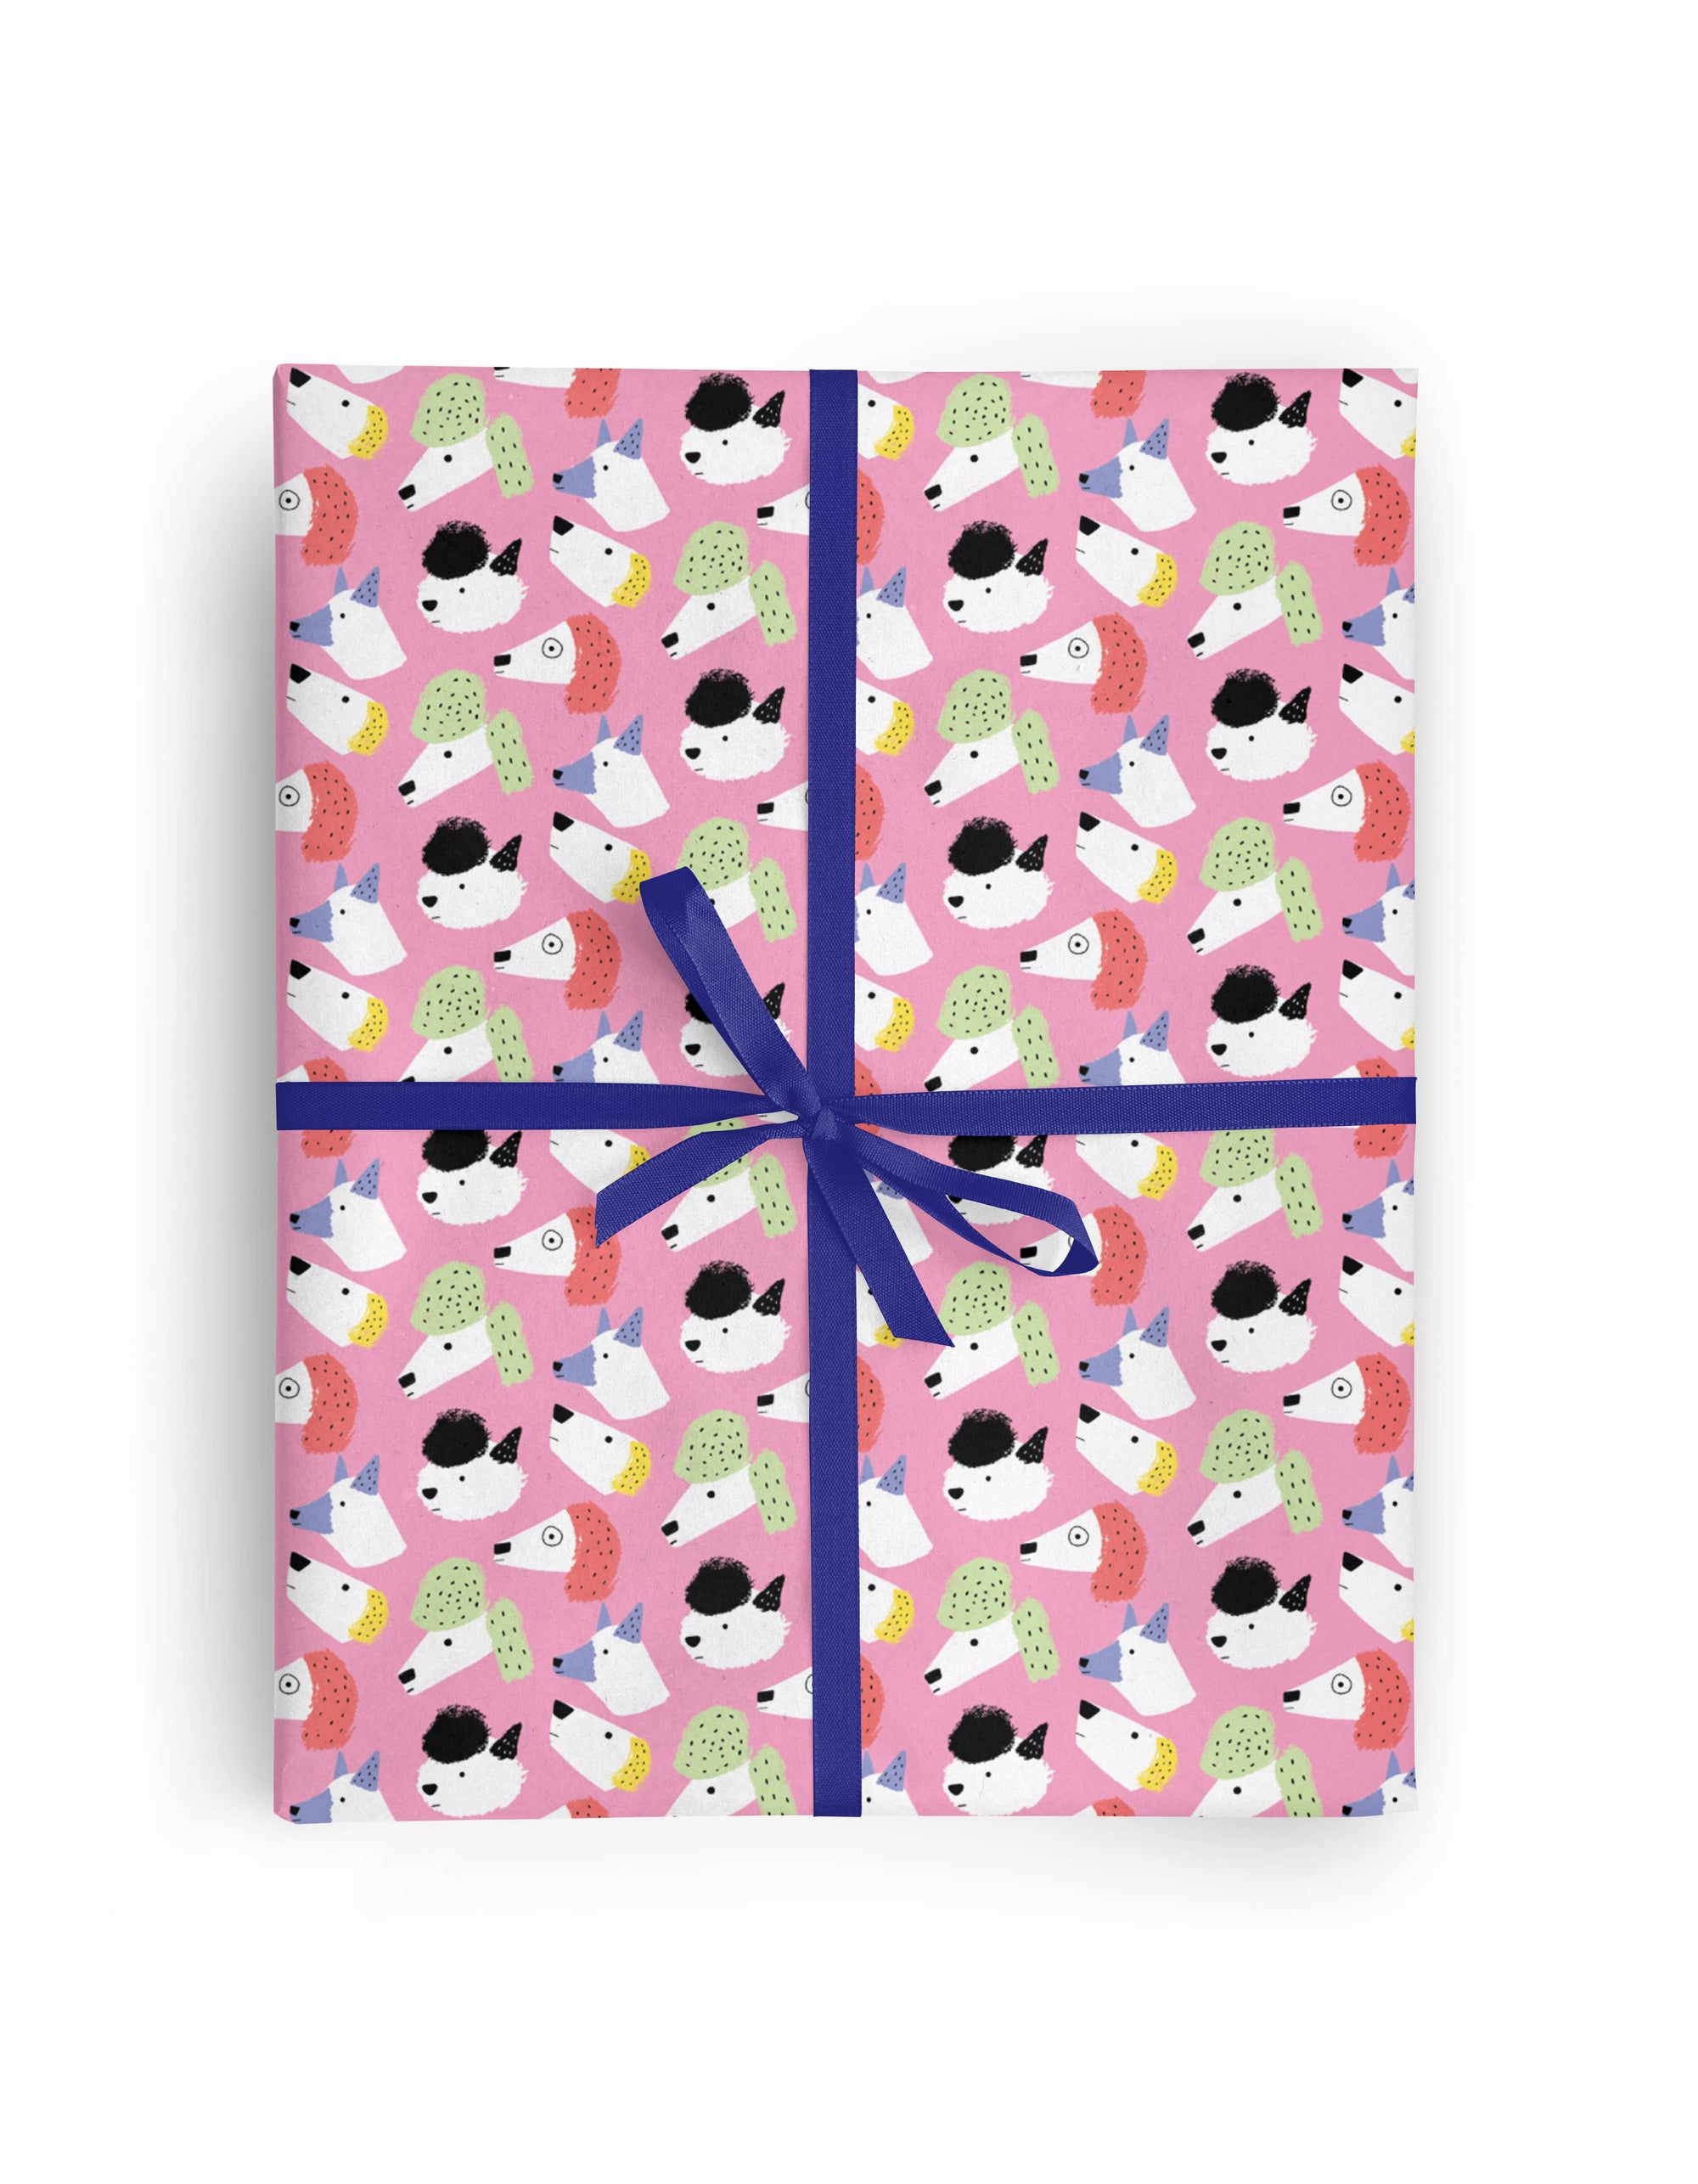 Doggies Rolled Gift Wrap, 3 Sheets